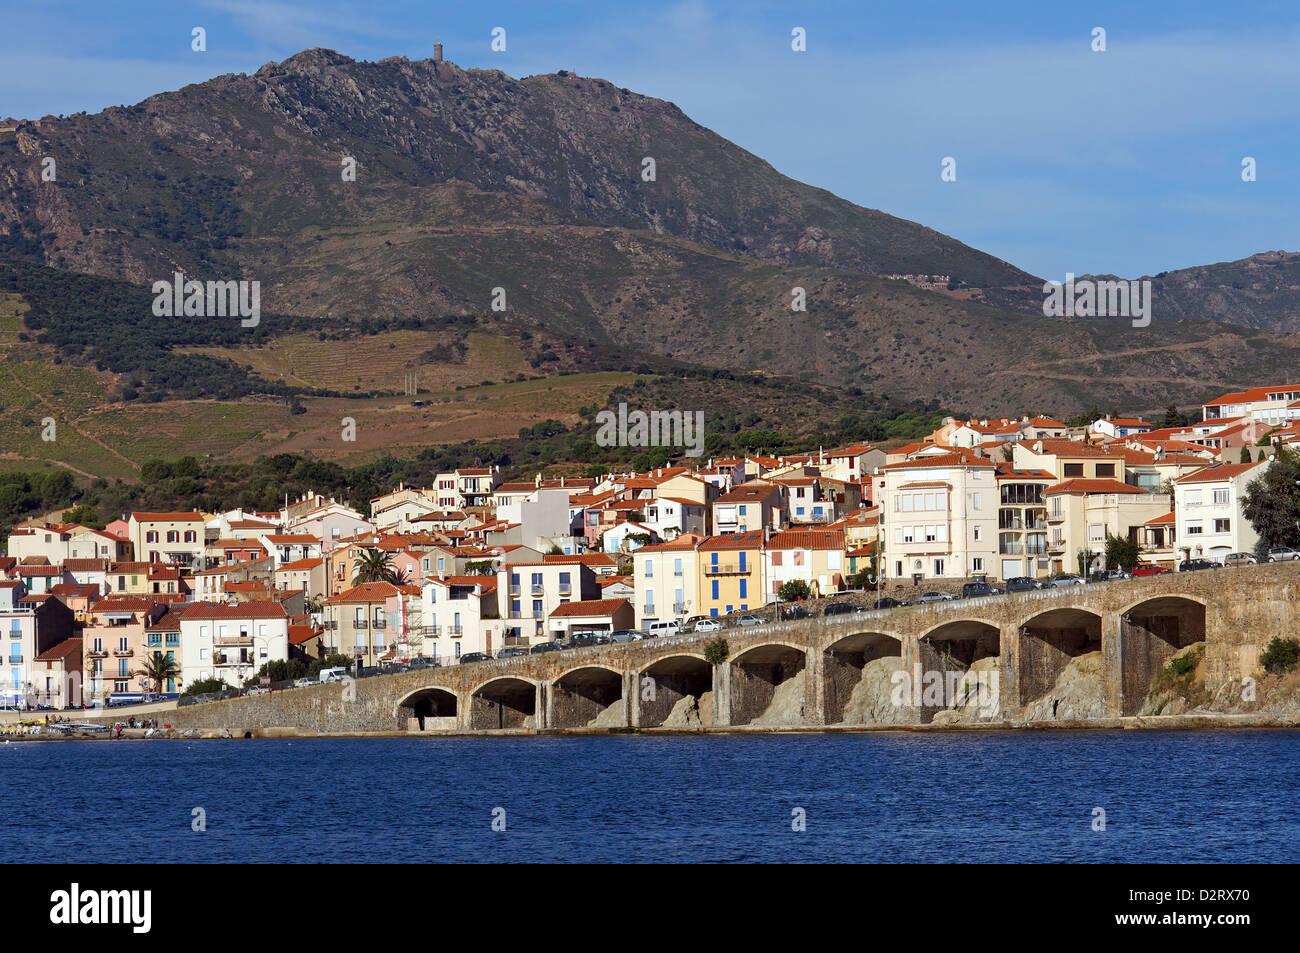 France town of Banyuls-sur-Mer on the Mediterranean coast, Roussillon, Pyrenees Orientales Stock Photo